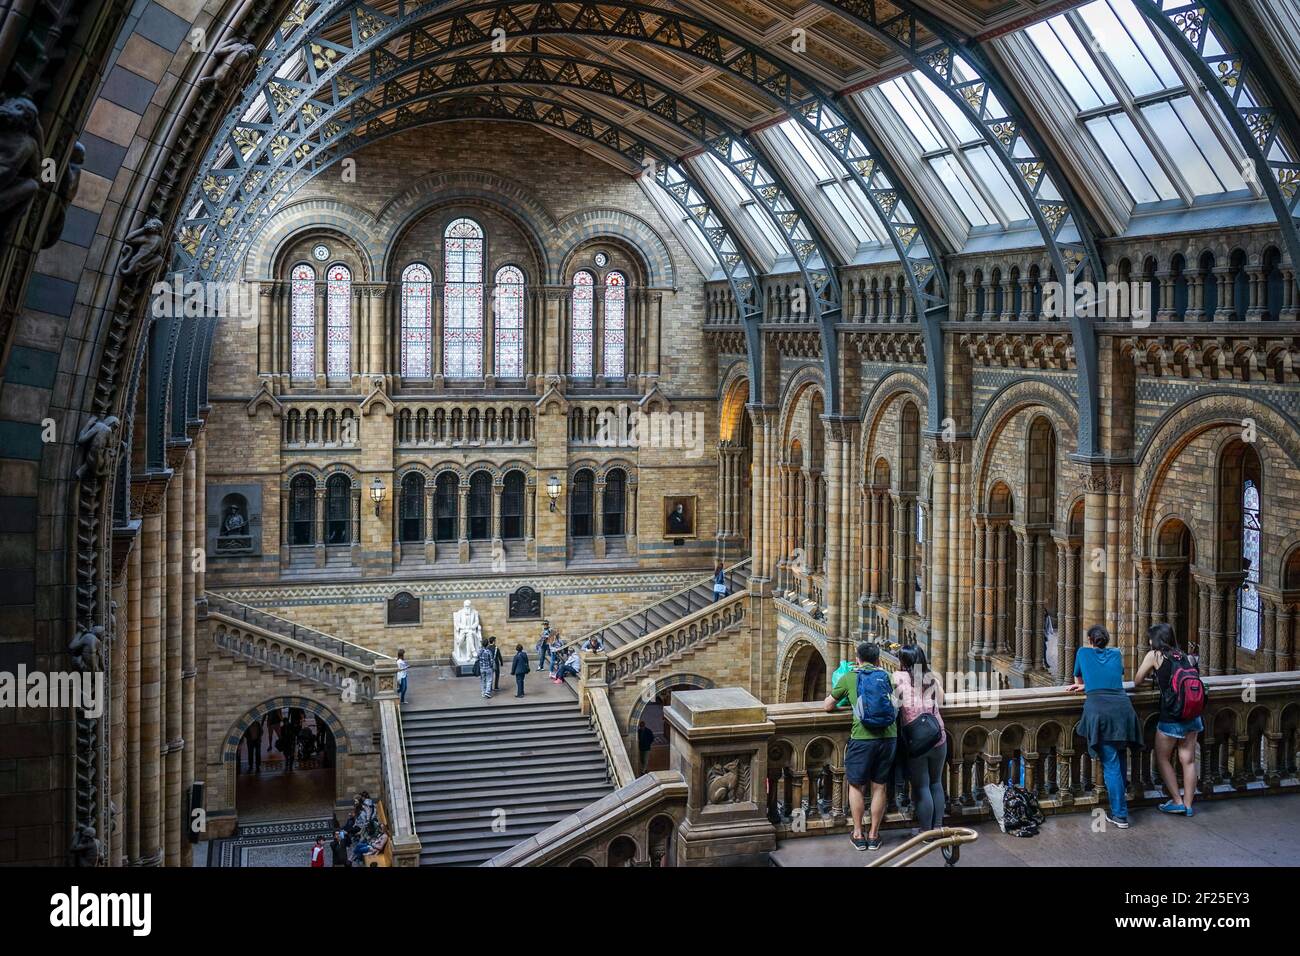 People Looking over a Balcony at the Natural History Museum in London Stock Photo